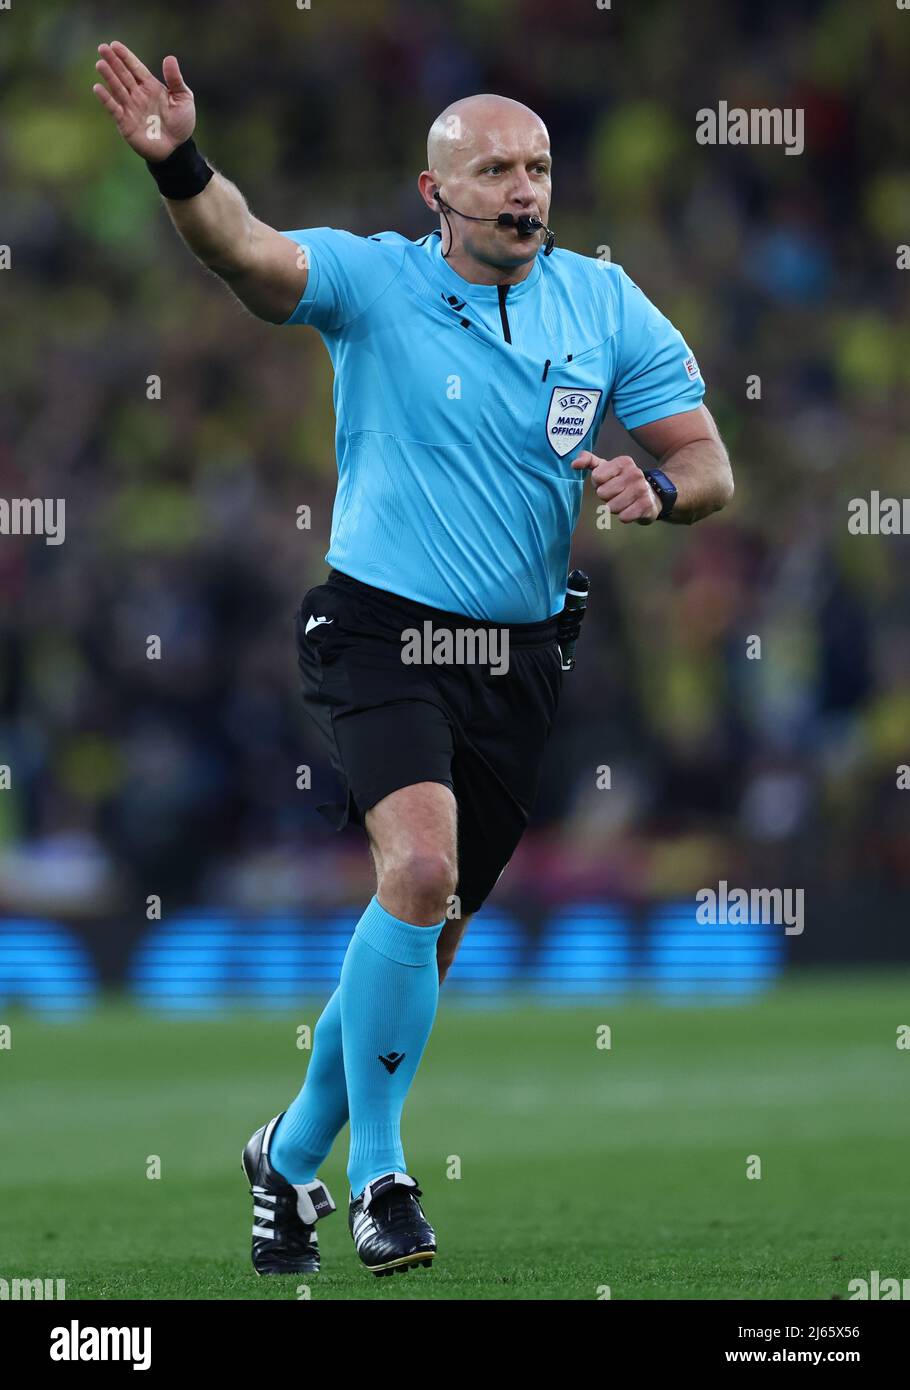 Liverpool, England, 27th April 2022.   Referee Szymon Marciniak during the UEFA Champions League match at Anfield, Liverpool. Picture credit should read: Darren Staples / Sportimage via PA Images Credit: Sportimage/Alamy Live News Stock Photo